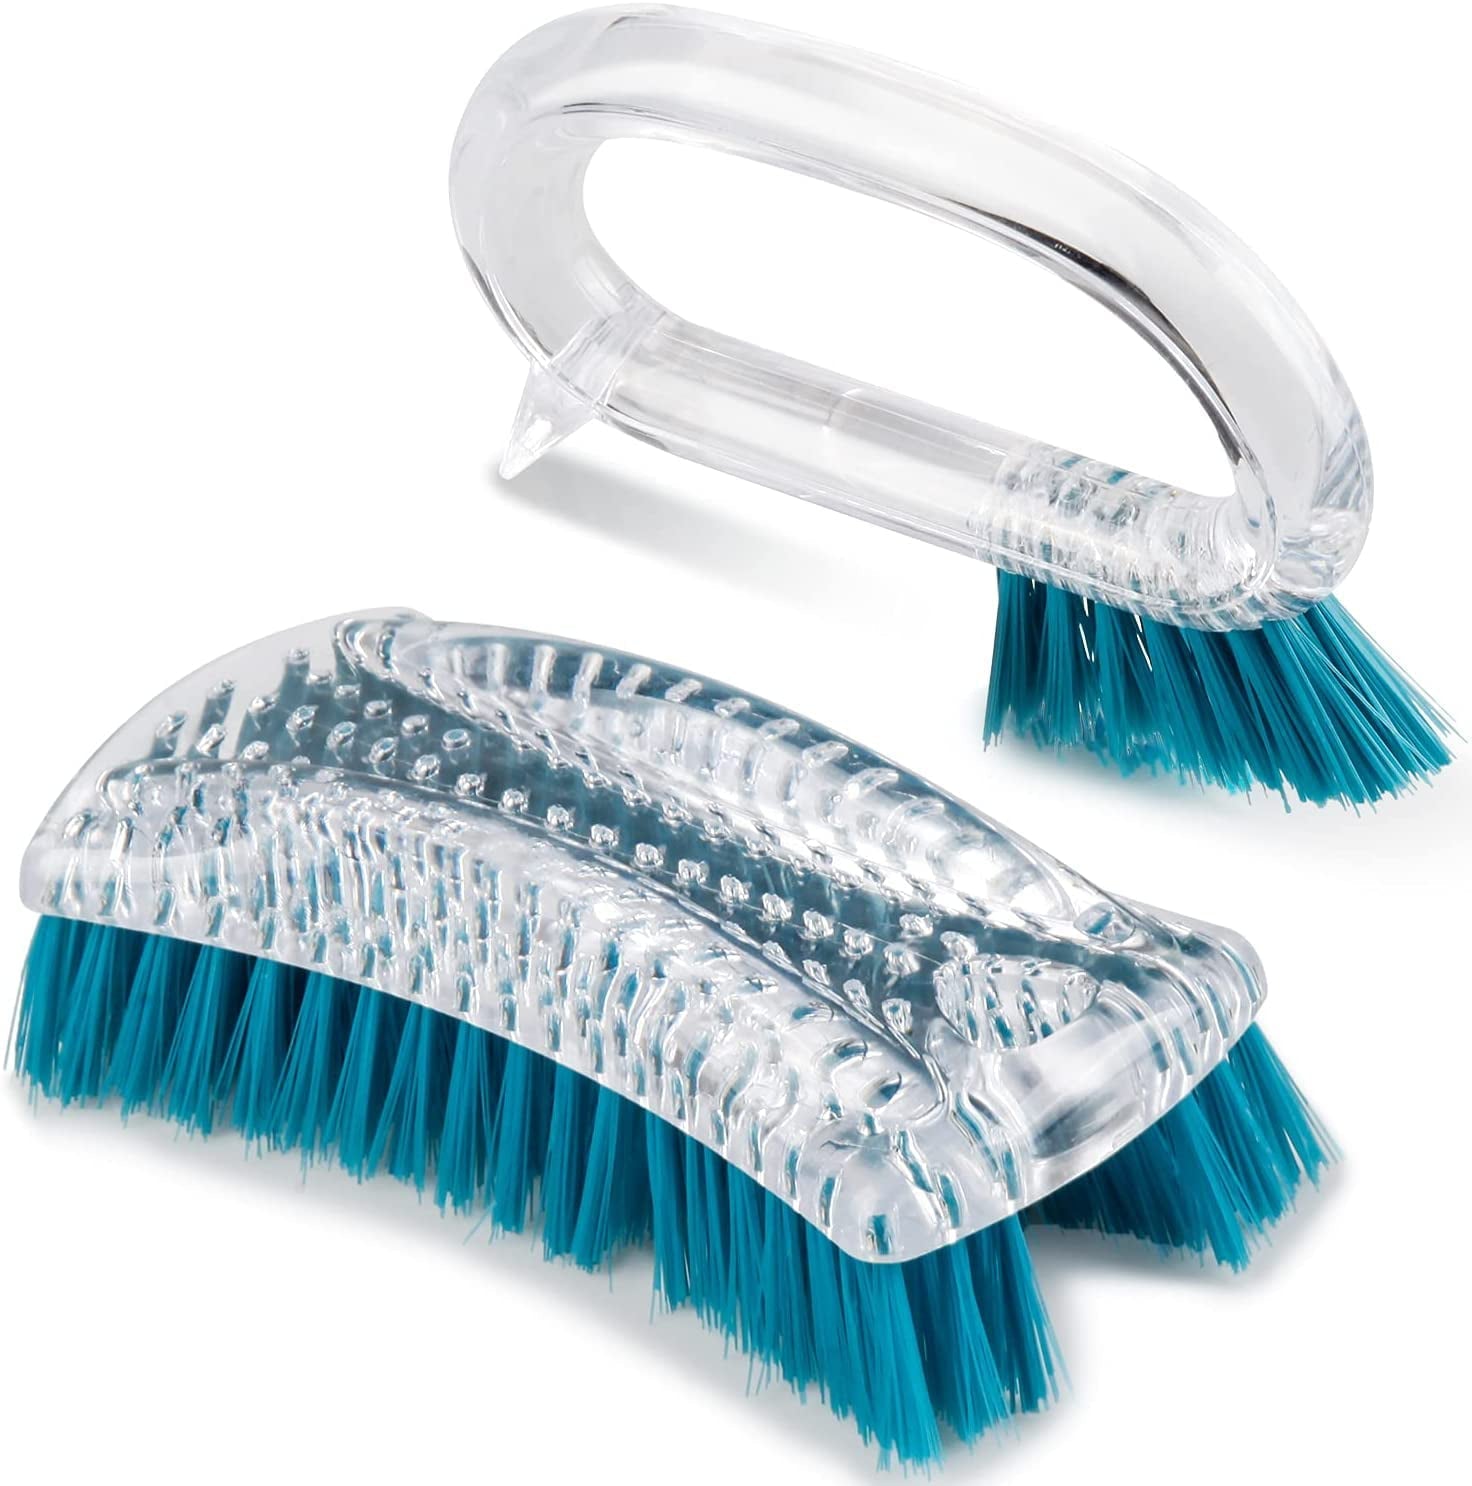 BCOOSS Floor Scrub Brush with Long Handle for Cleaning 2 in 1